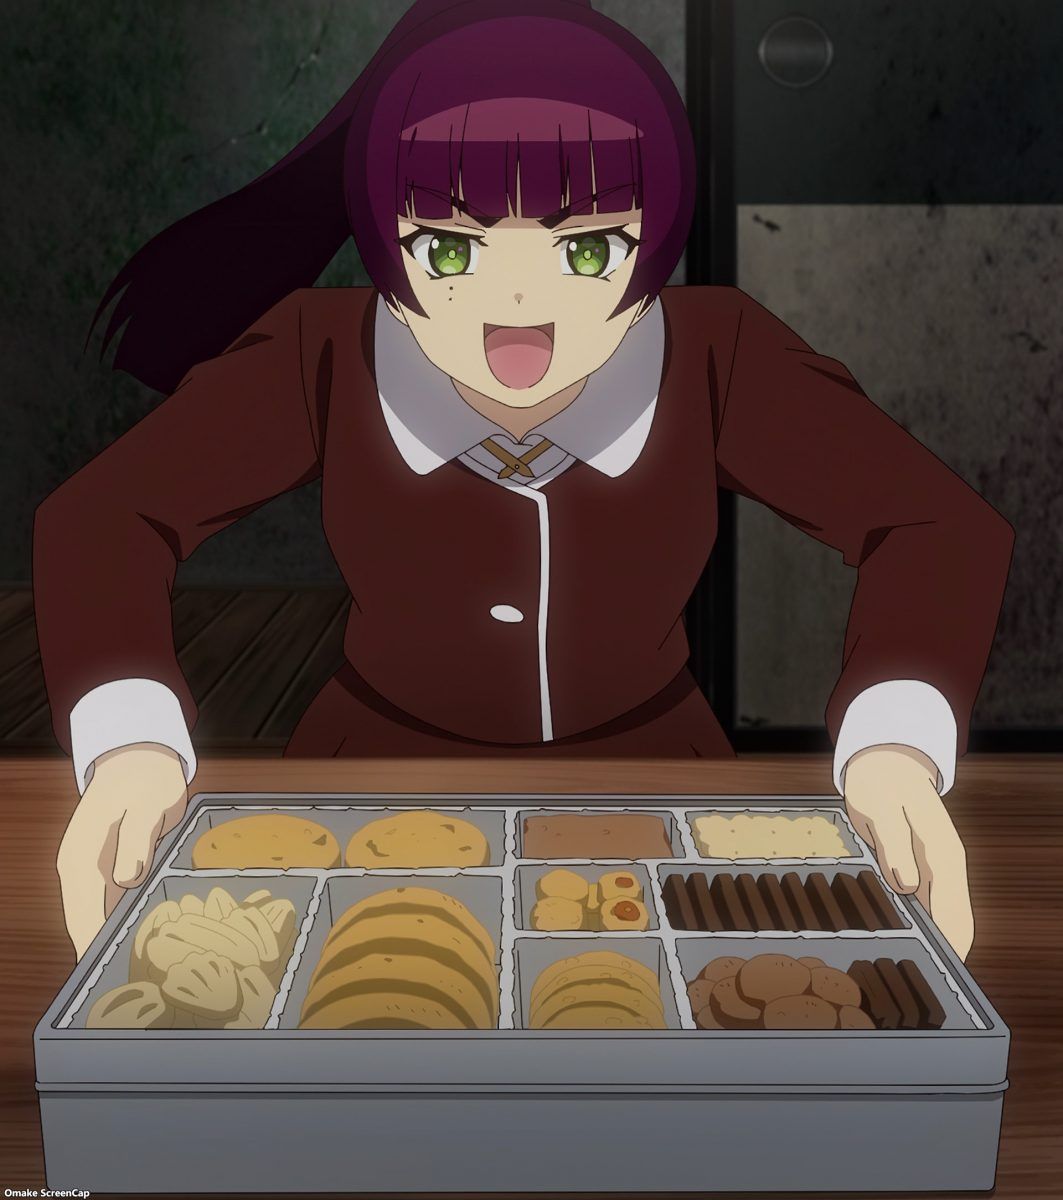 The Great Jahy Will Not Be Defeated! Episode 14 Kyouko Has Fancy Snacks